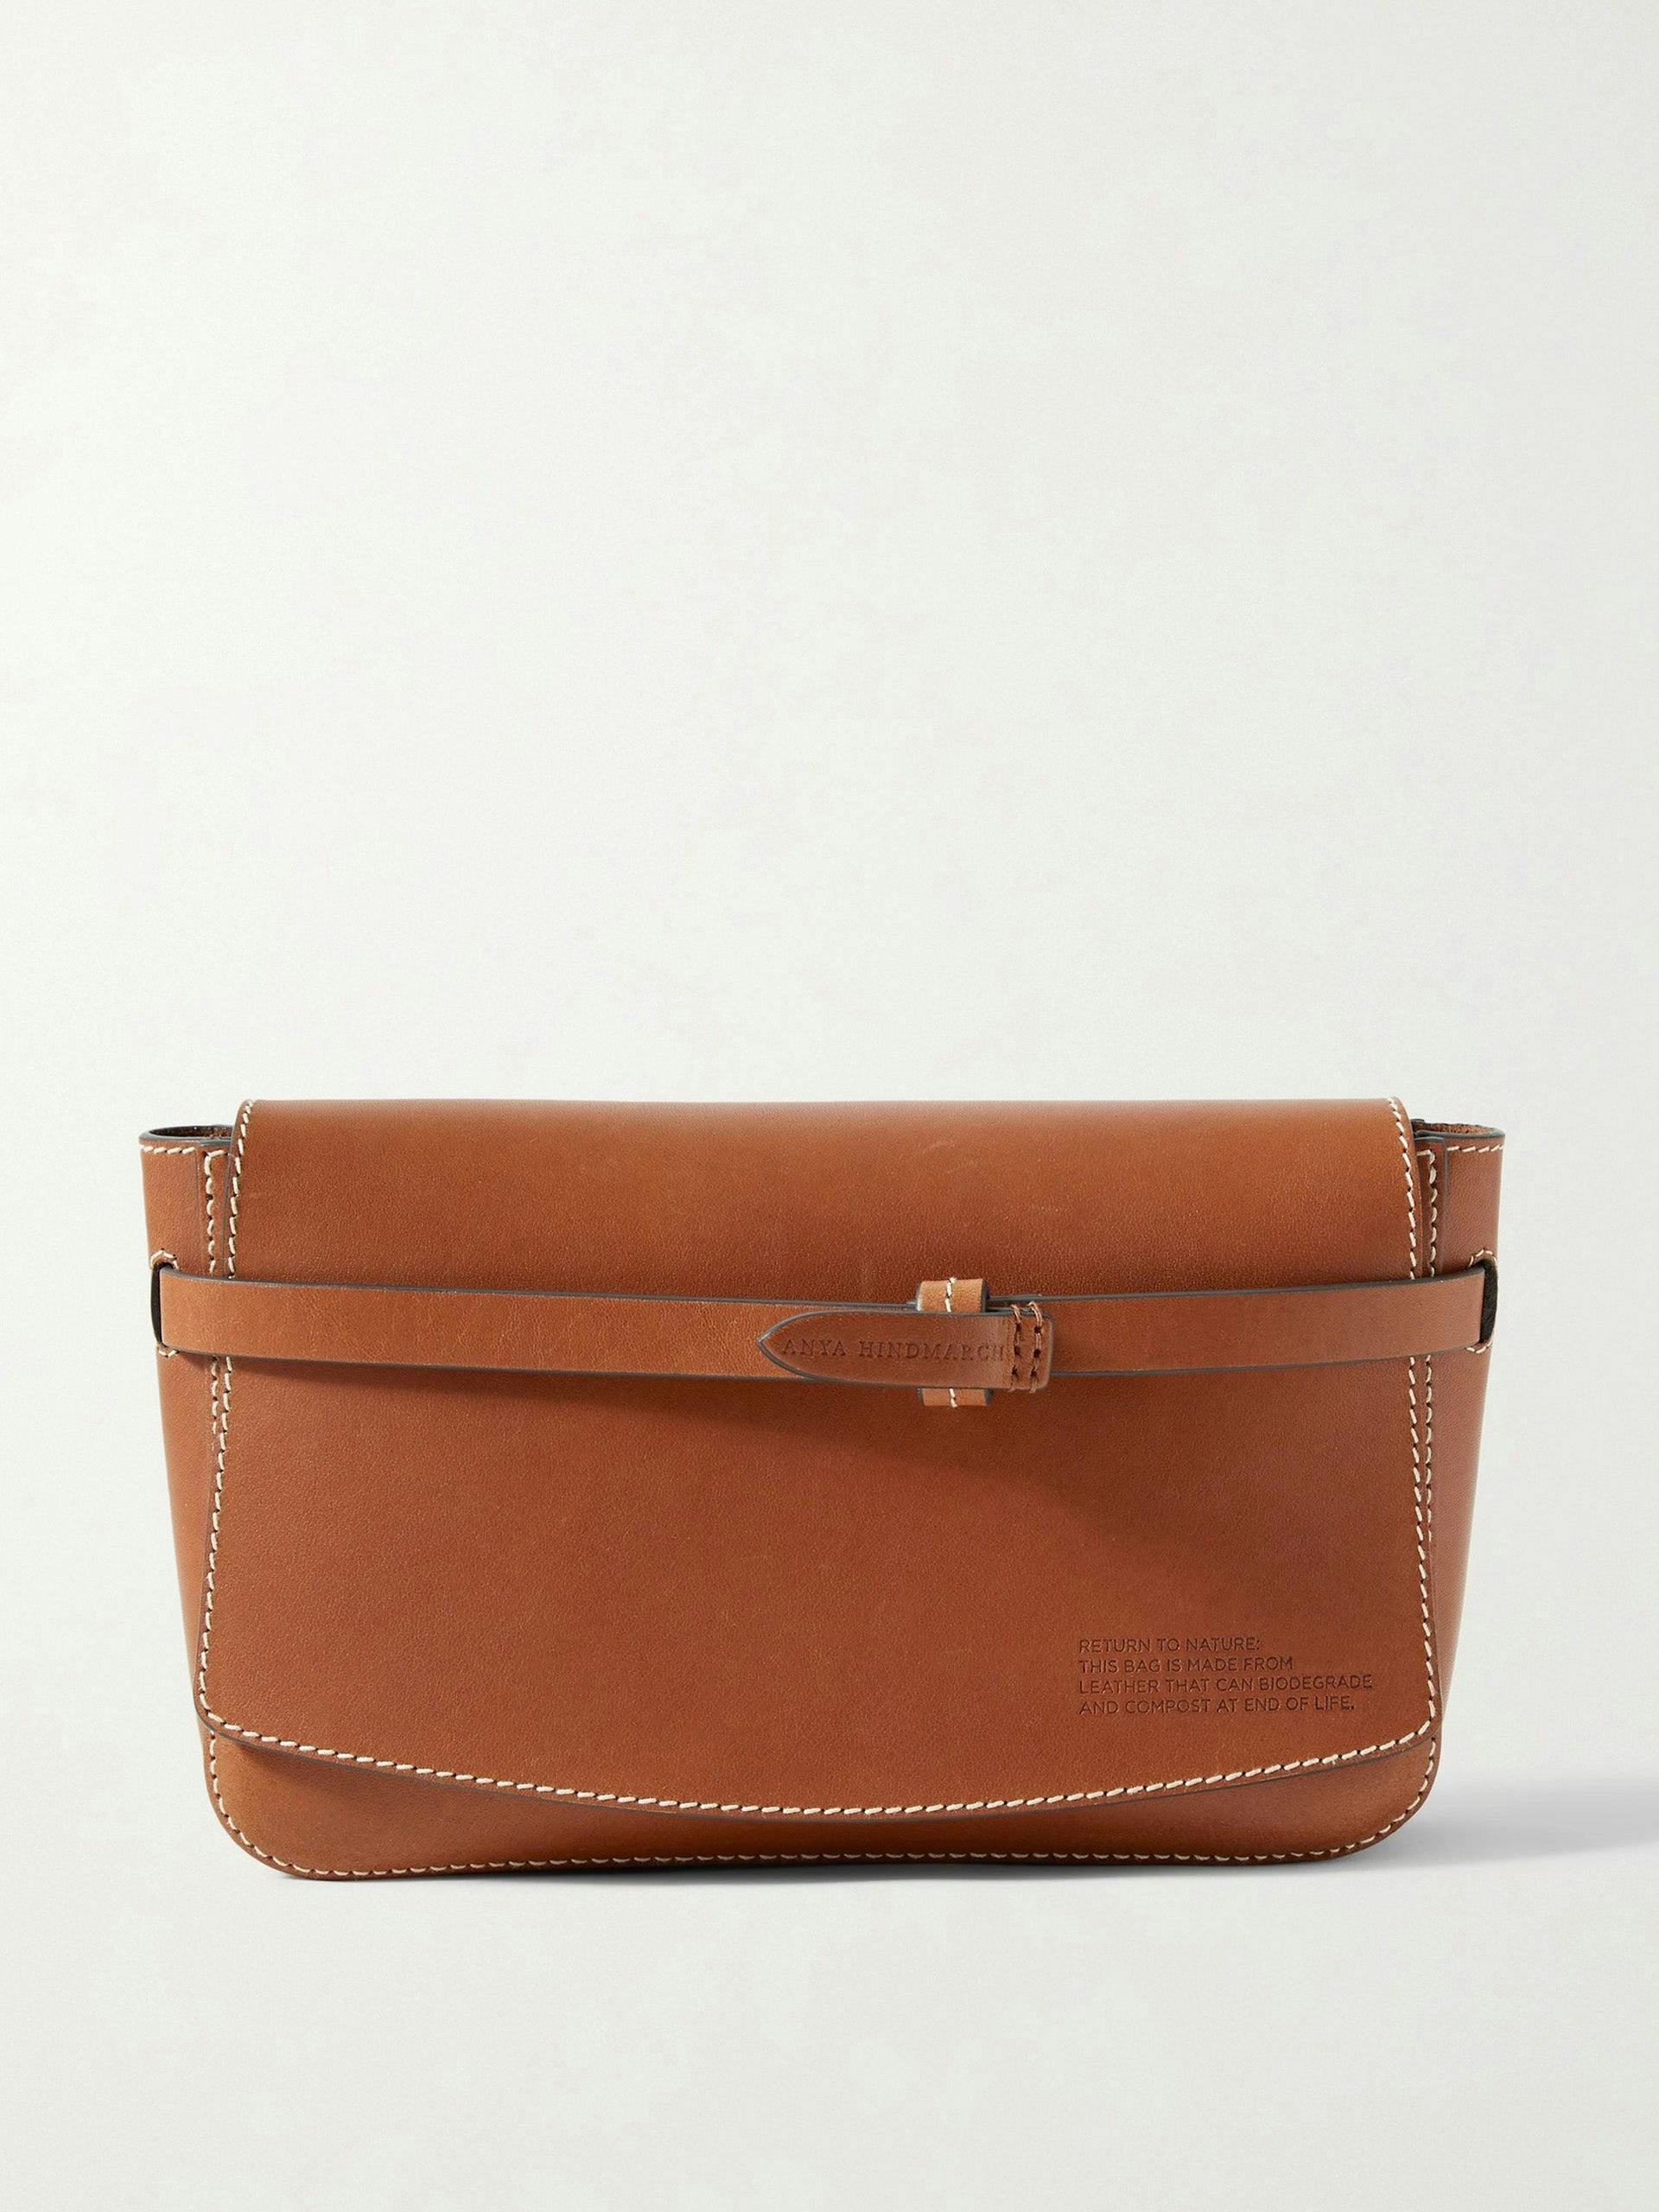 Return to Nature leather clutch